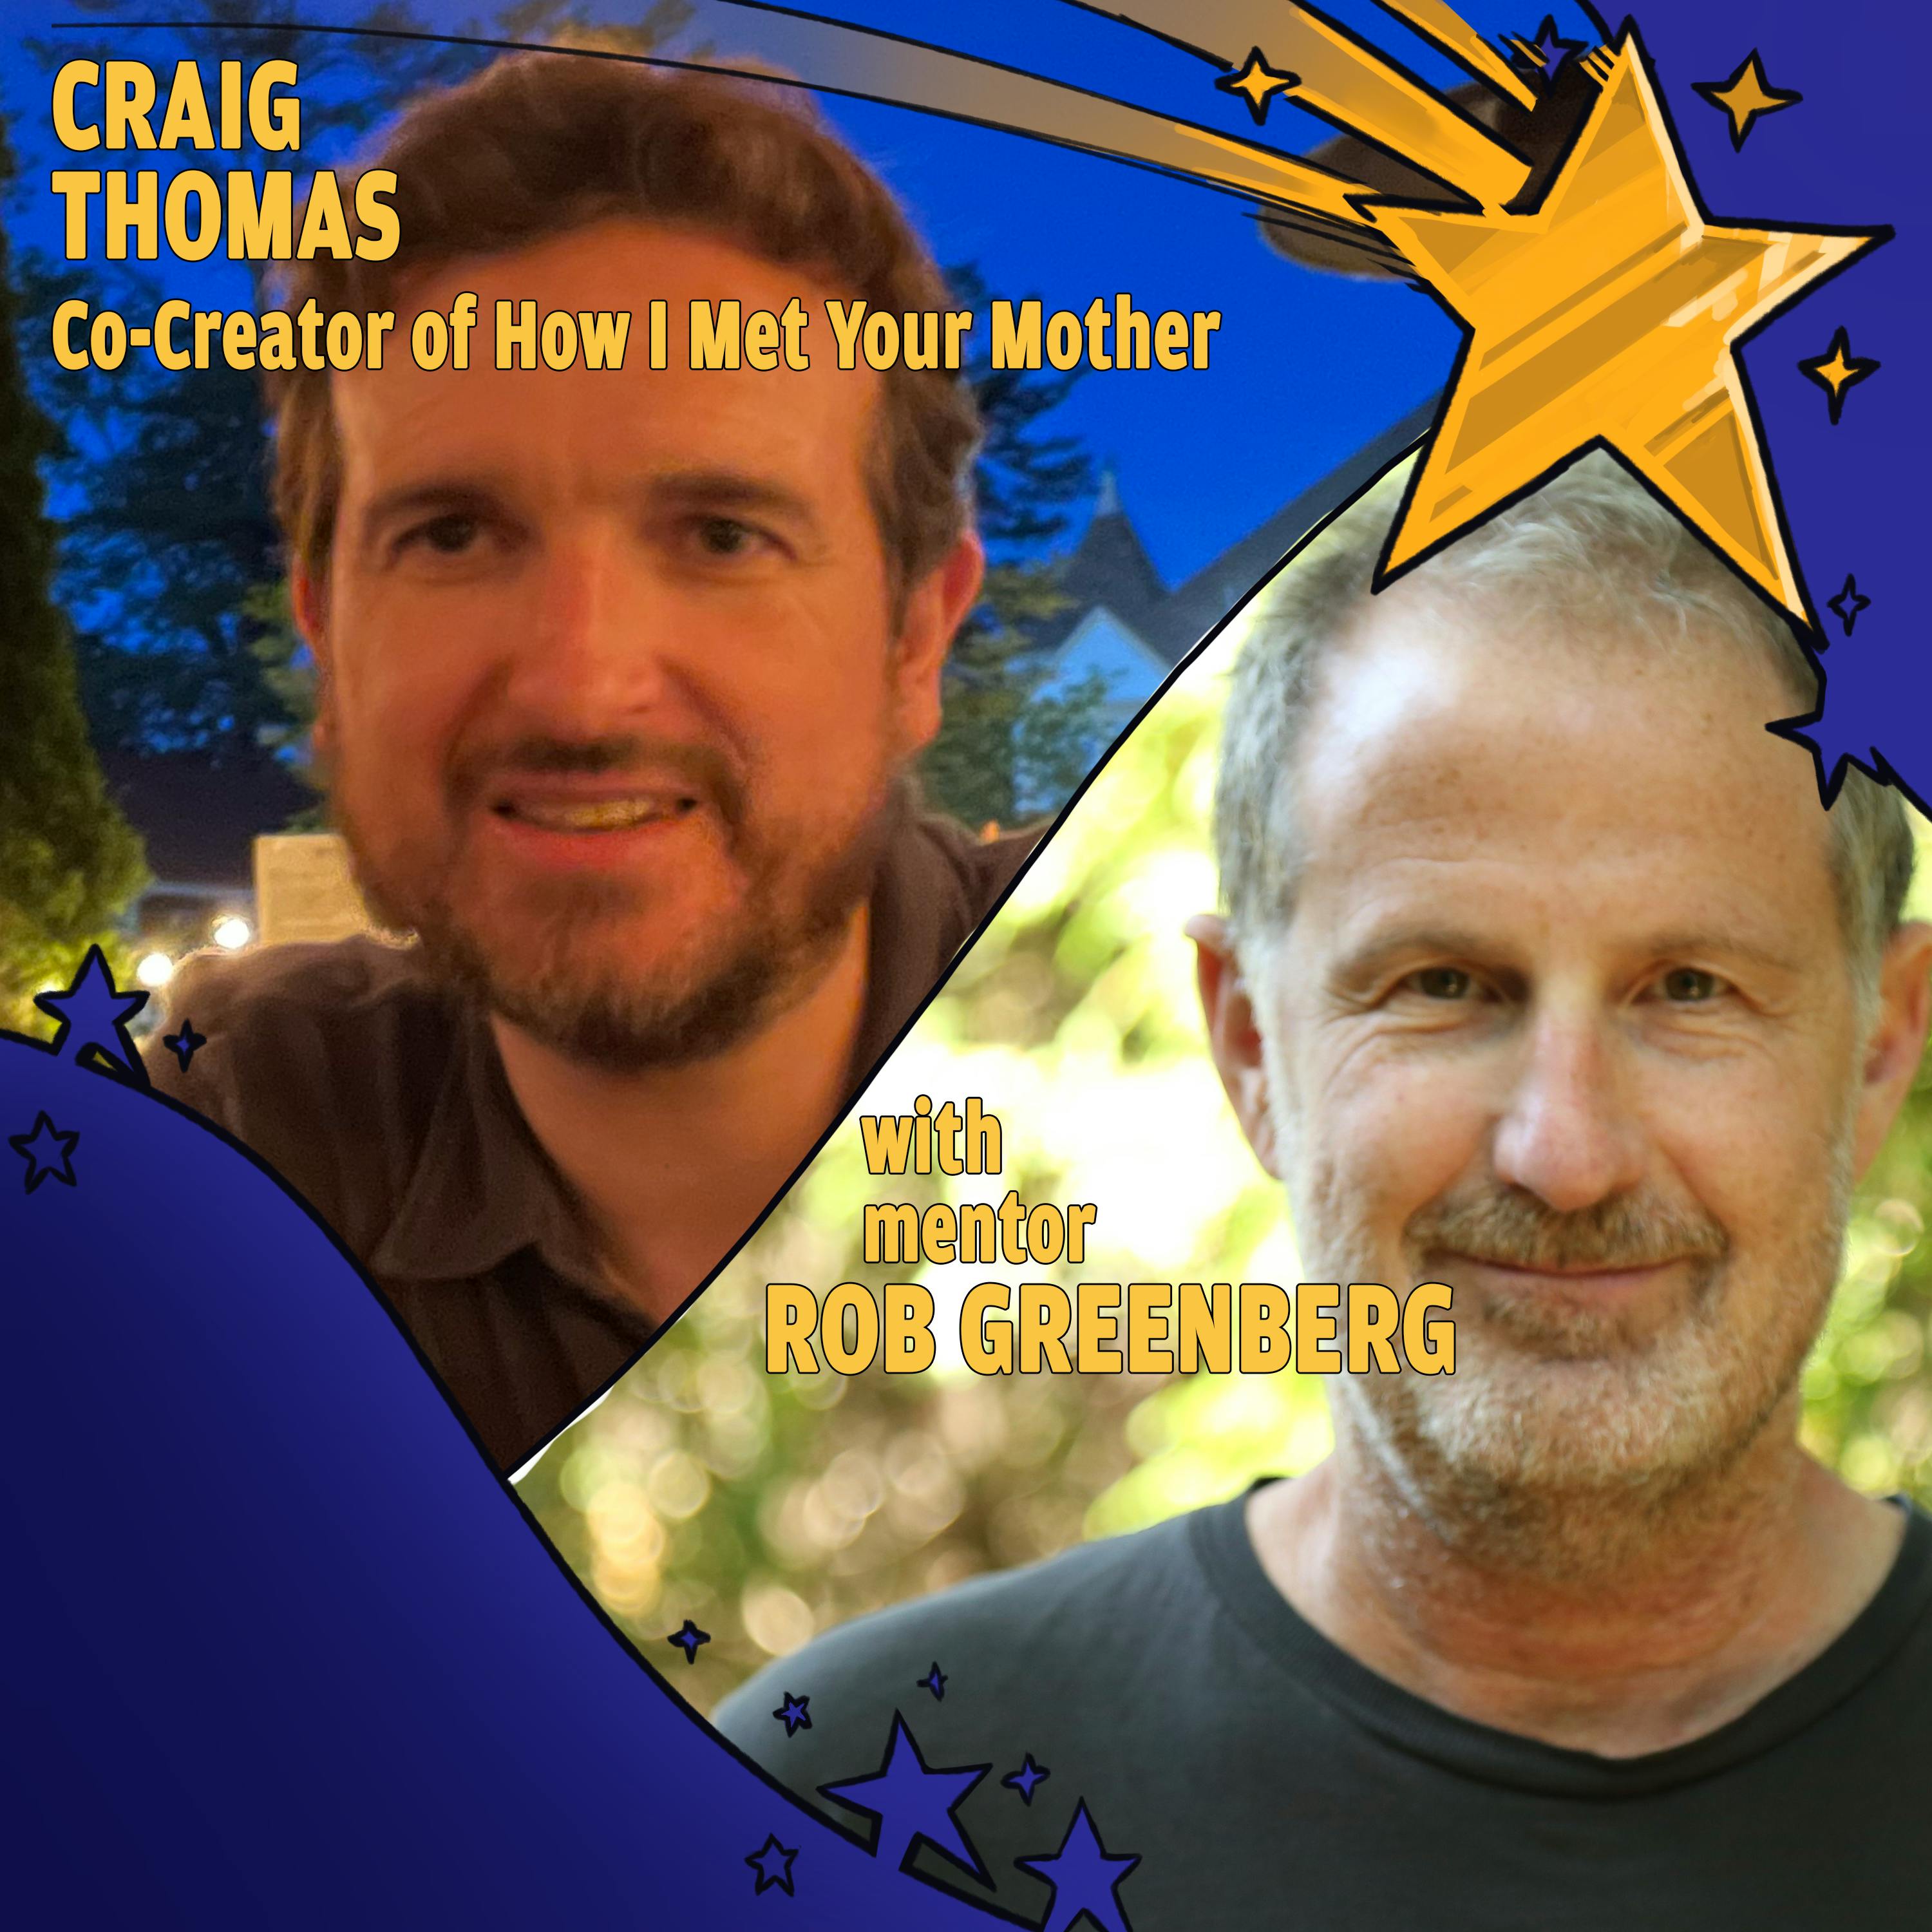 How They Met Each Other: Craig Thomas and Rob Greenberg